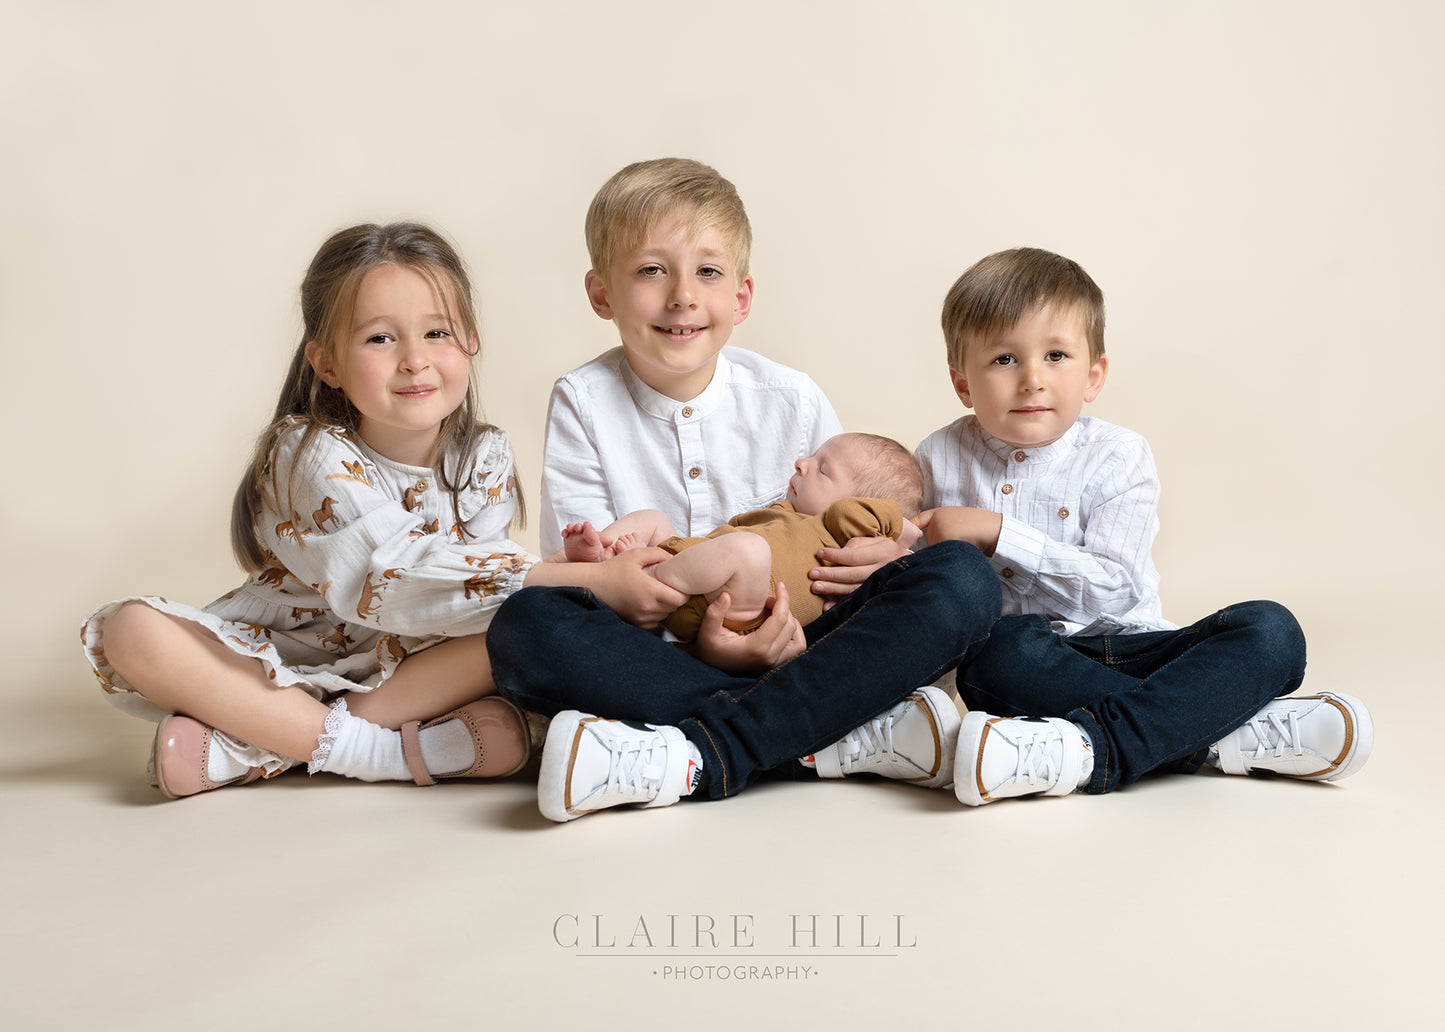 Professional family portrait photography photo shoot by Claire Hill Photography. Studio based in  Perton Wolverhampton West Midlands and Shropshire book today